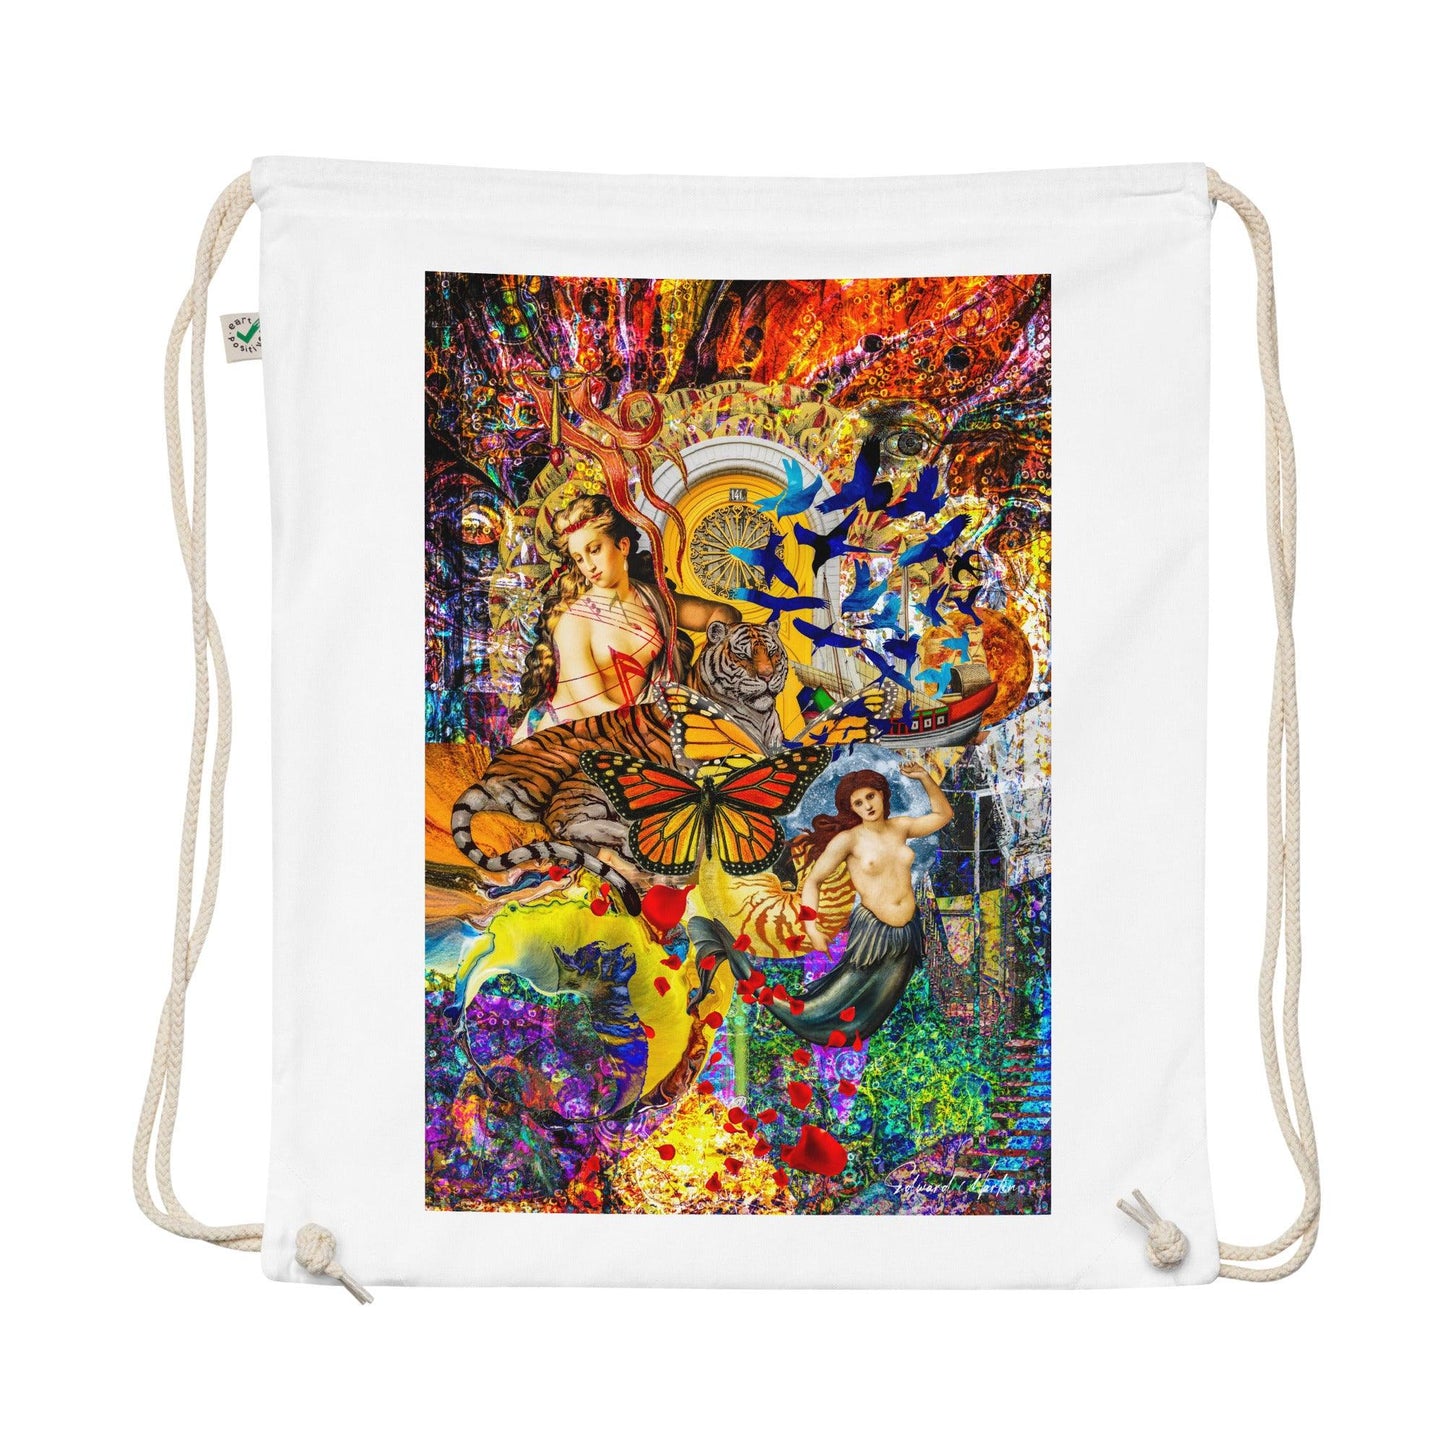 Organic cotton drawstring bag-Dream in Colors by Edward Martin - Elementologie